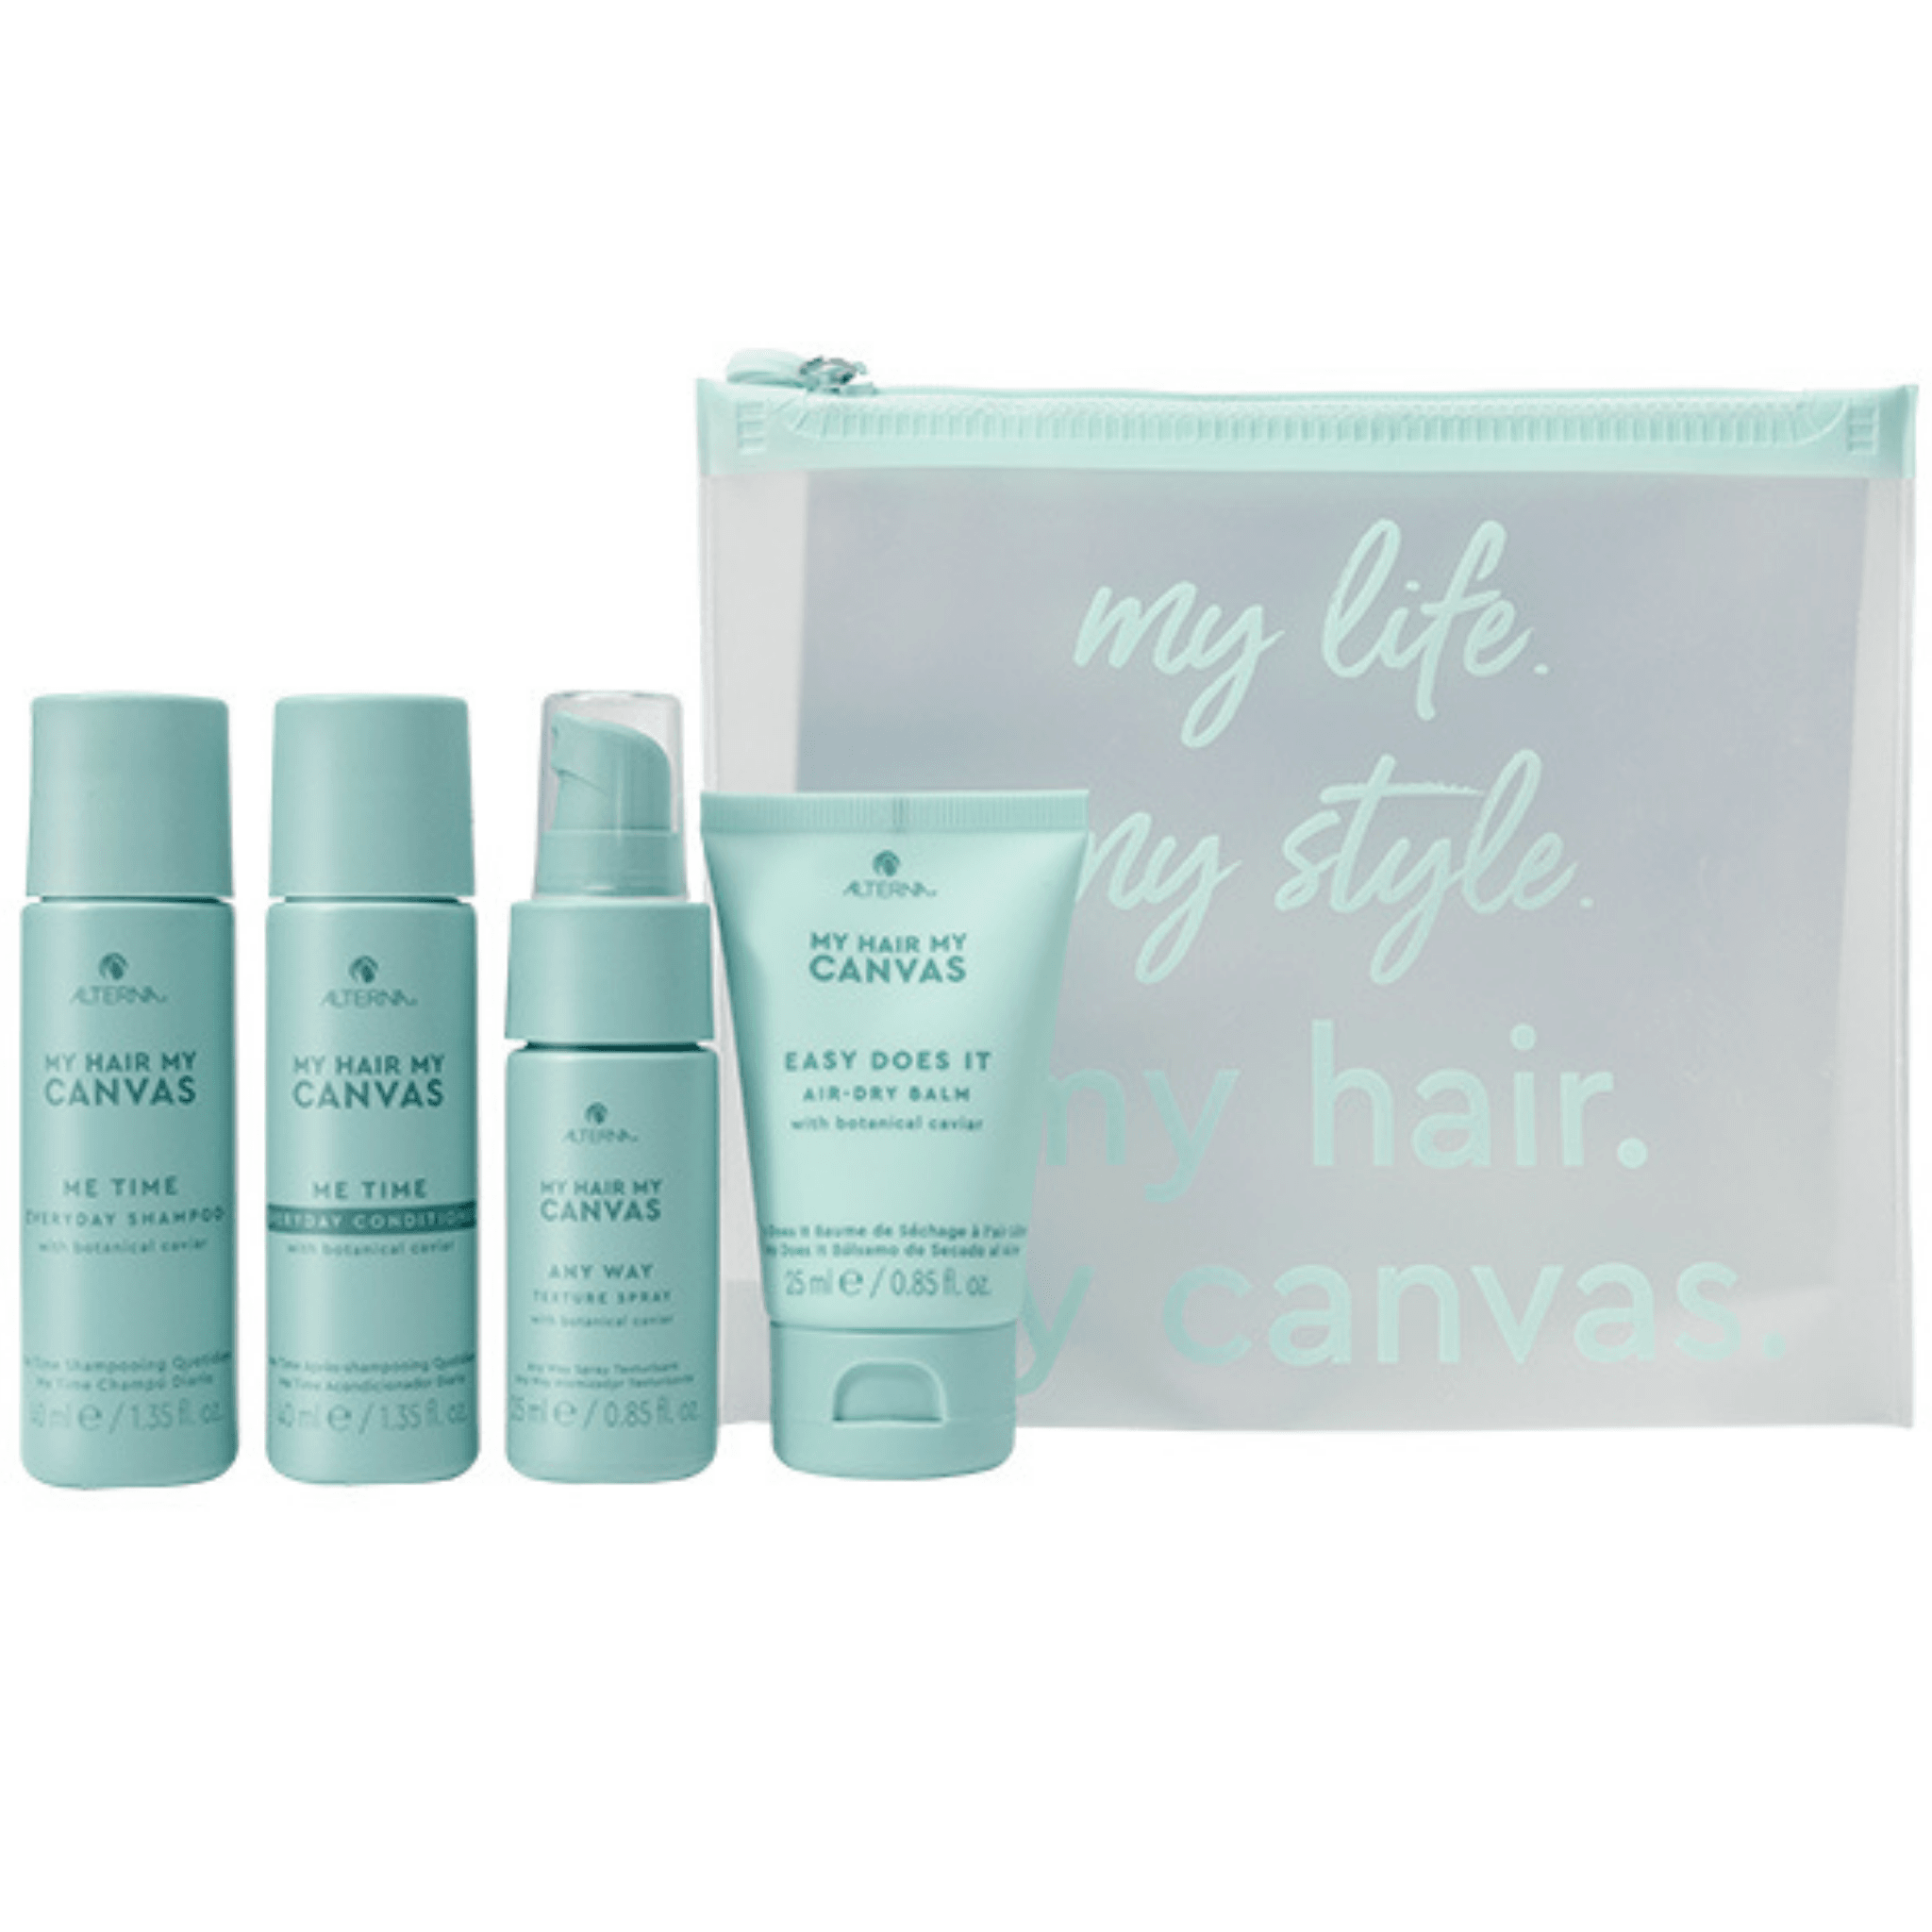 Alterna. My Hair My Canvas Pochette de Formats Voyage Me Time Any Time - Concept C. Shop